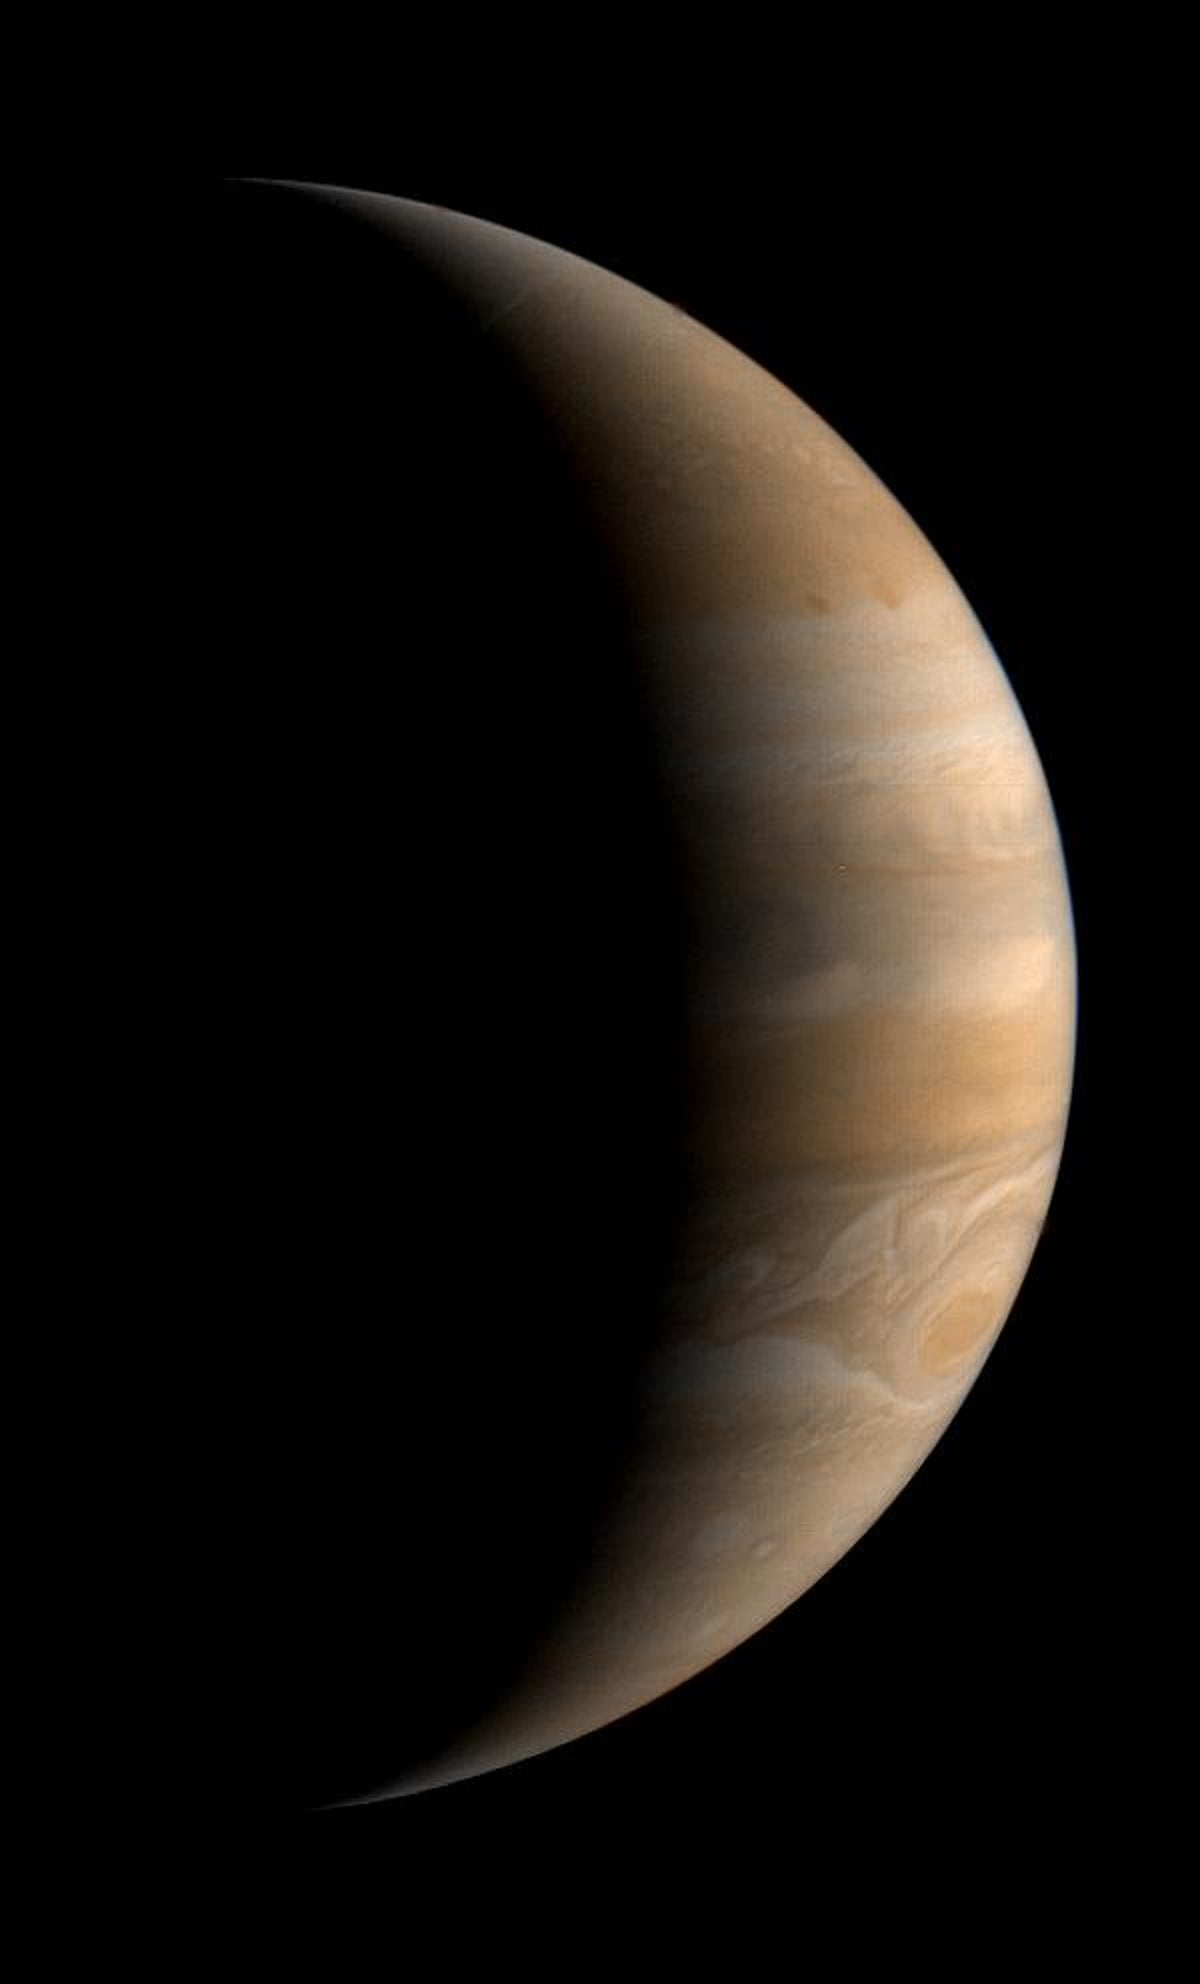 Jupiter may have grown large on a diet of infant planets, study suggests